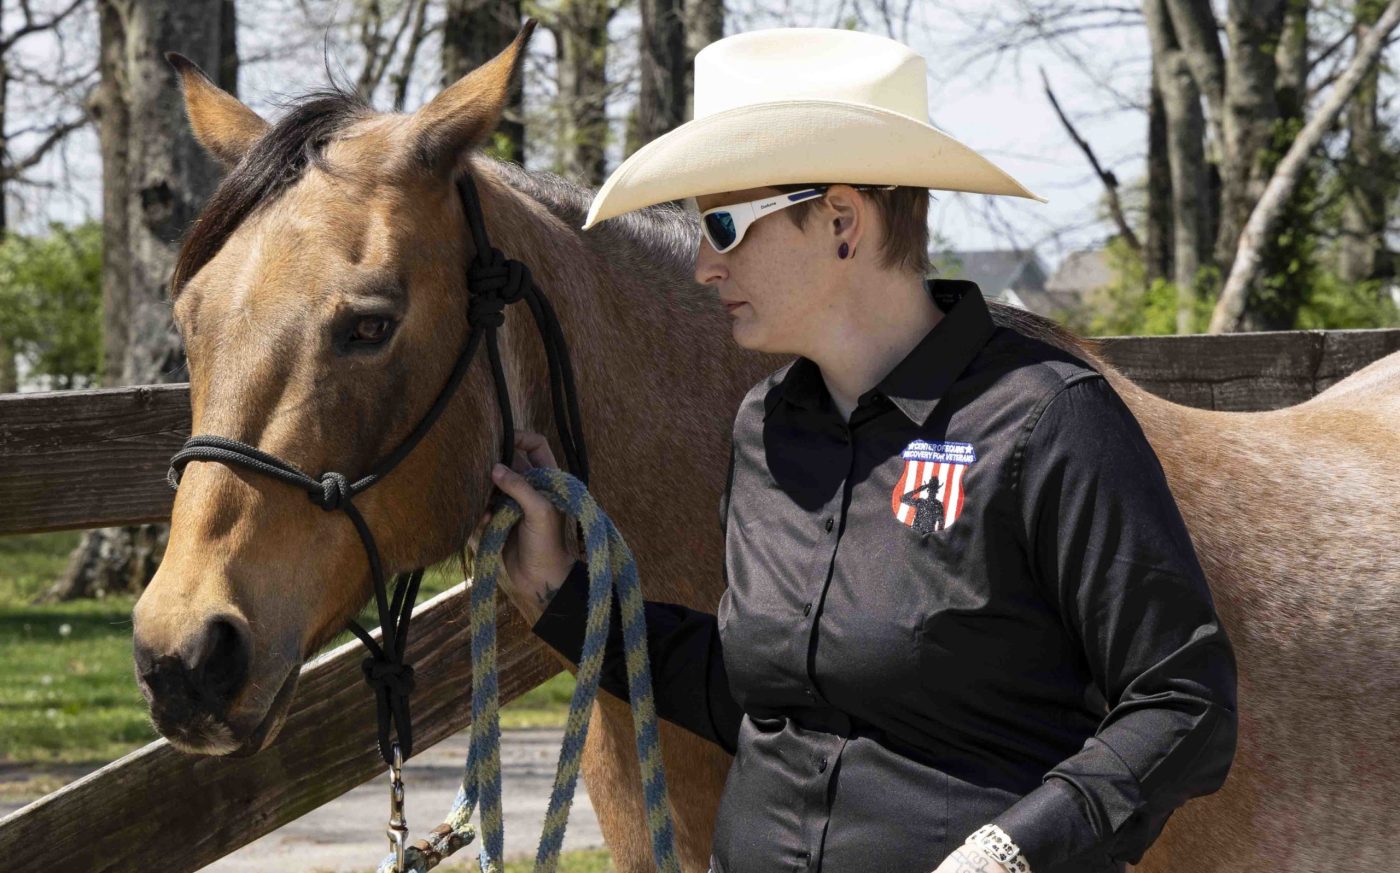 Through interactions and learning about the behaviors of horses, Veterans learn about themselves through their development in class.